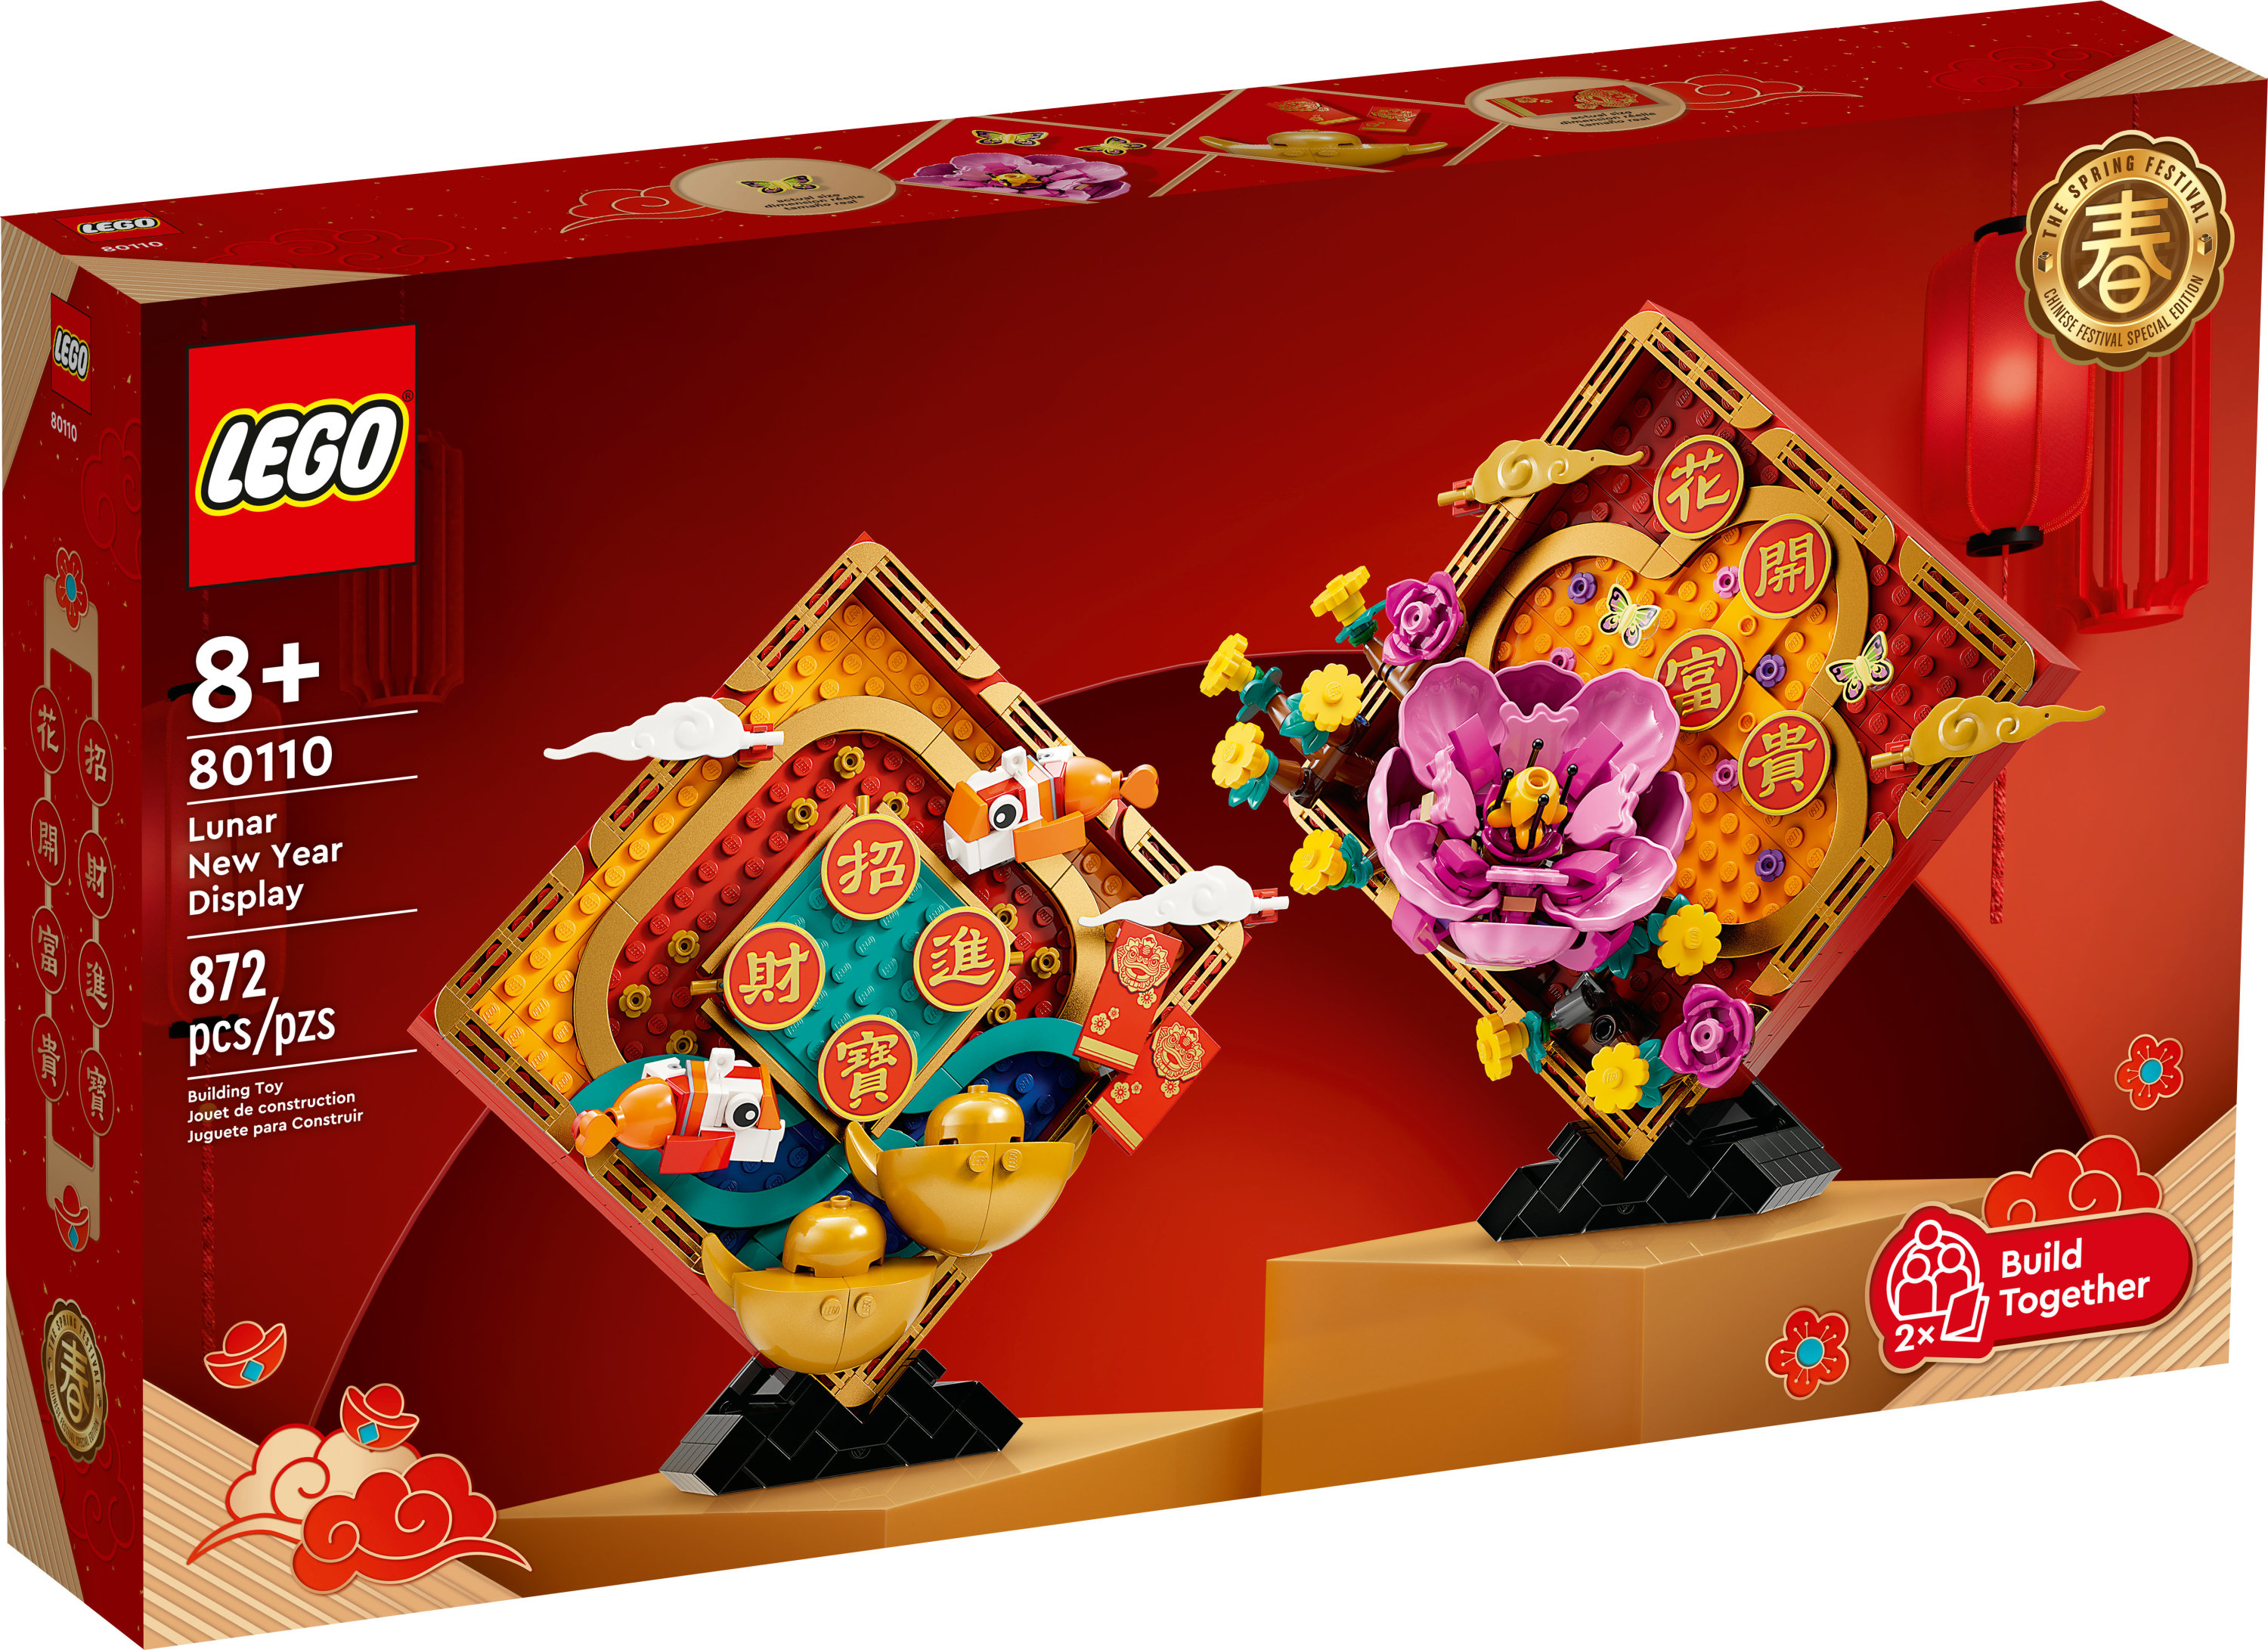 LEGO Lunar New Year Display 80110 Building Toy Set (872 Pieces) - image 3 of 8